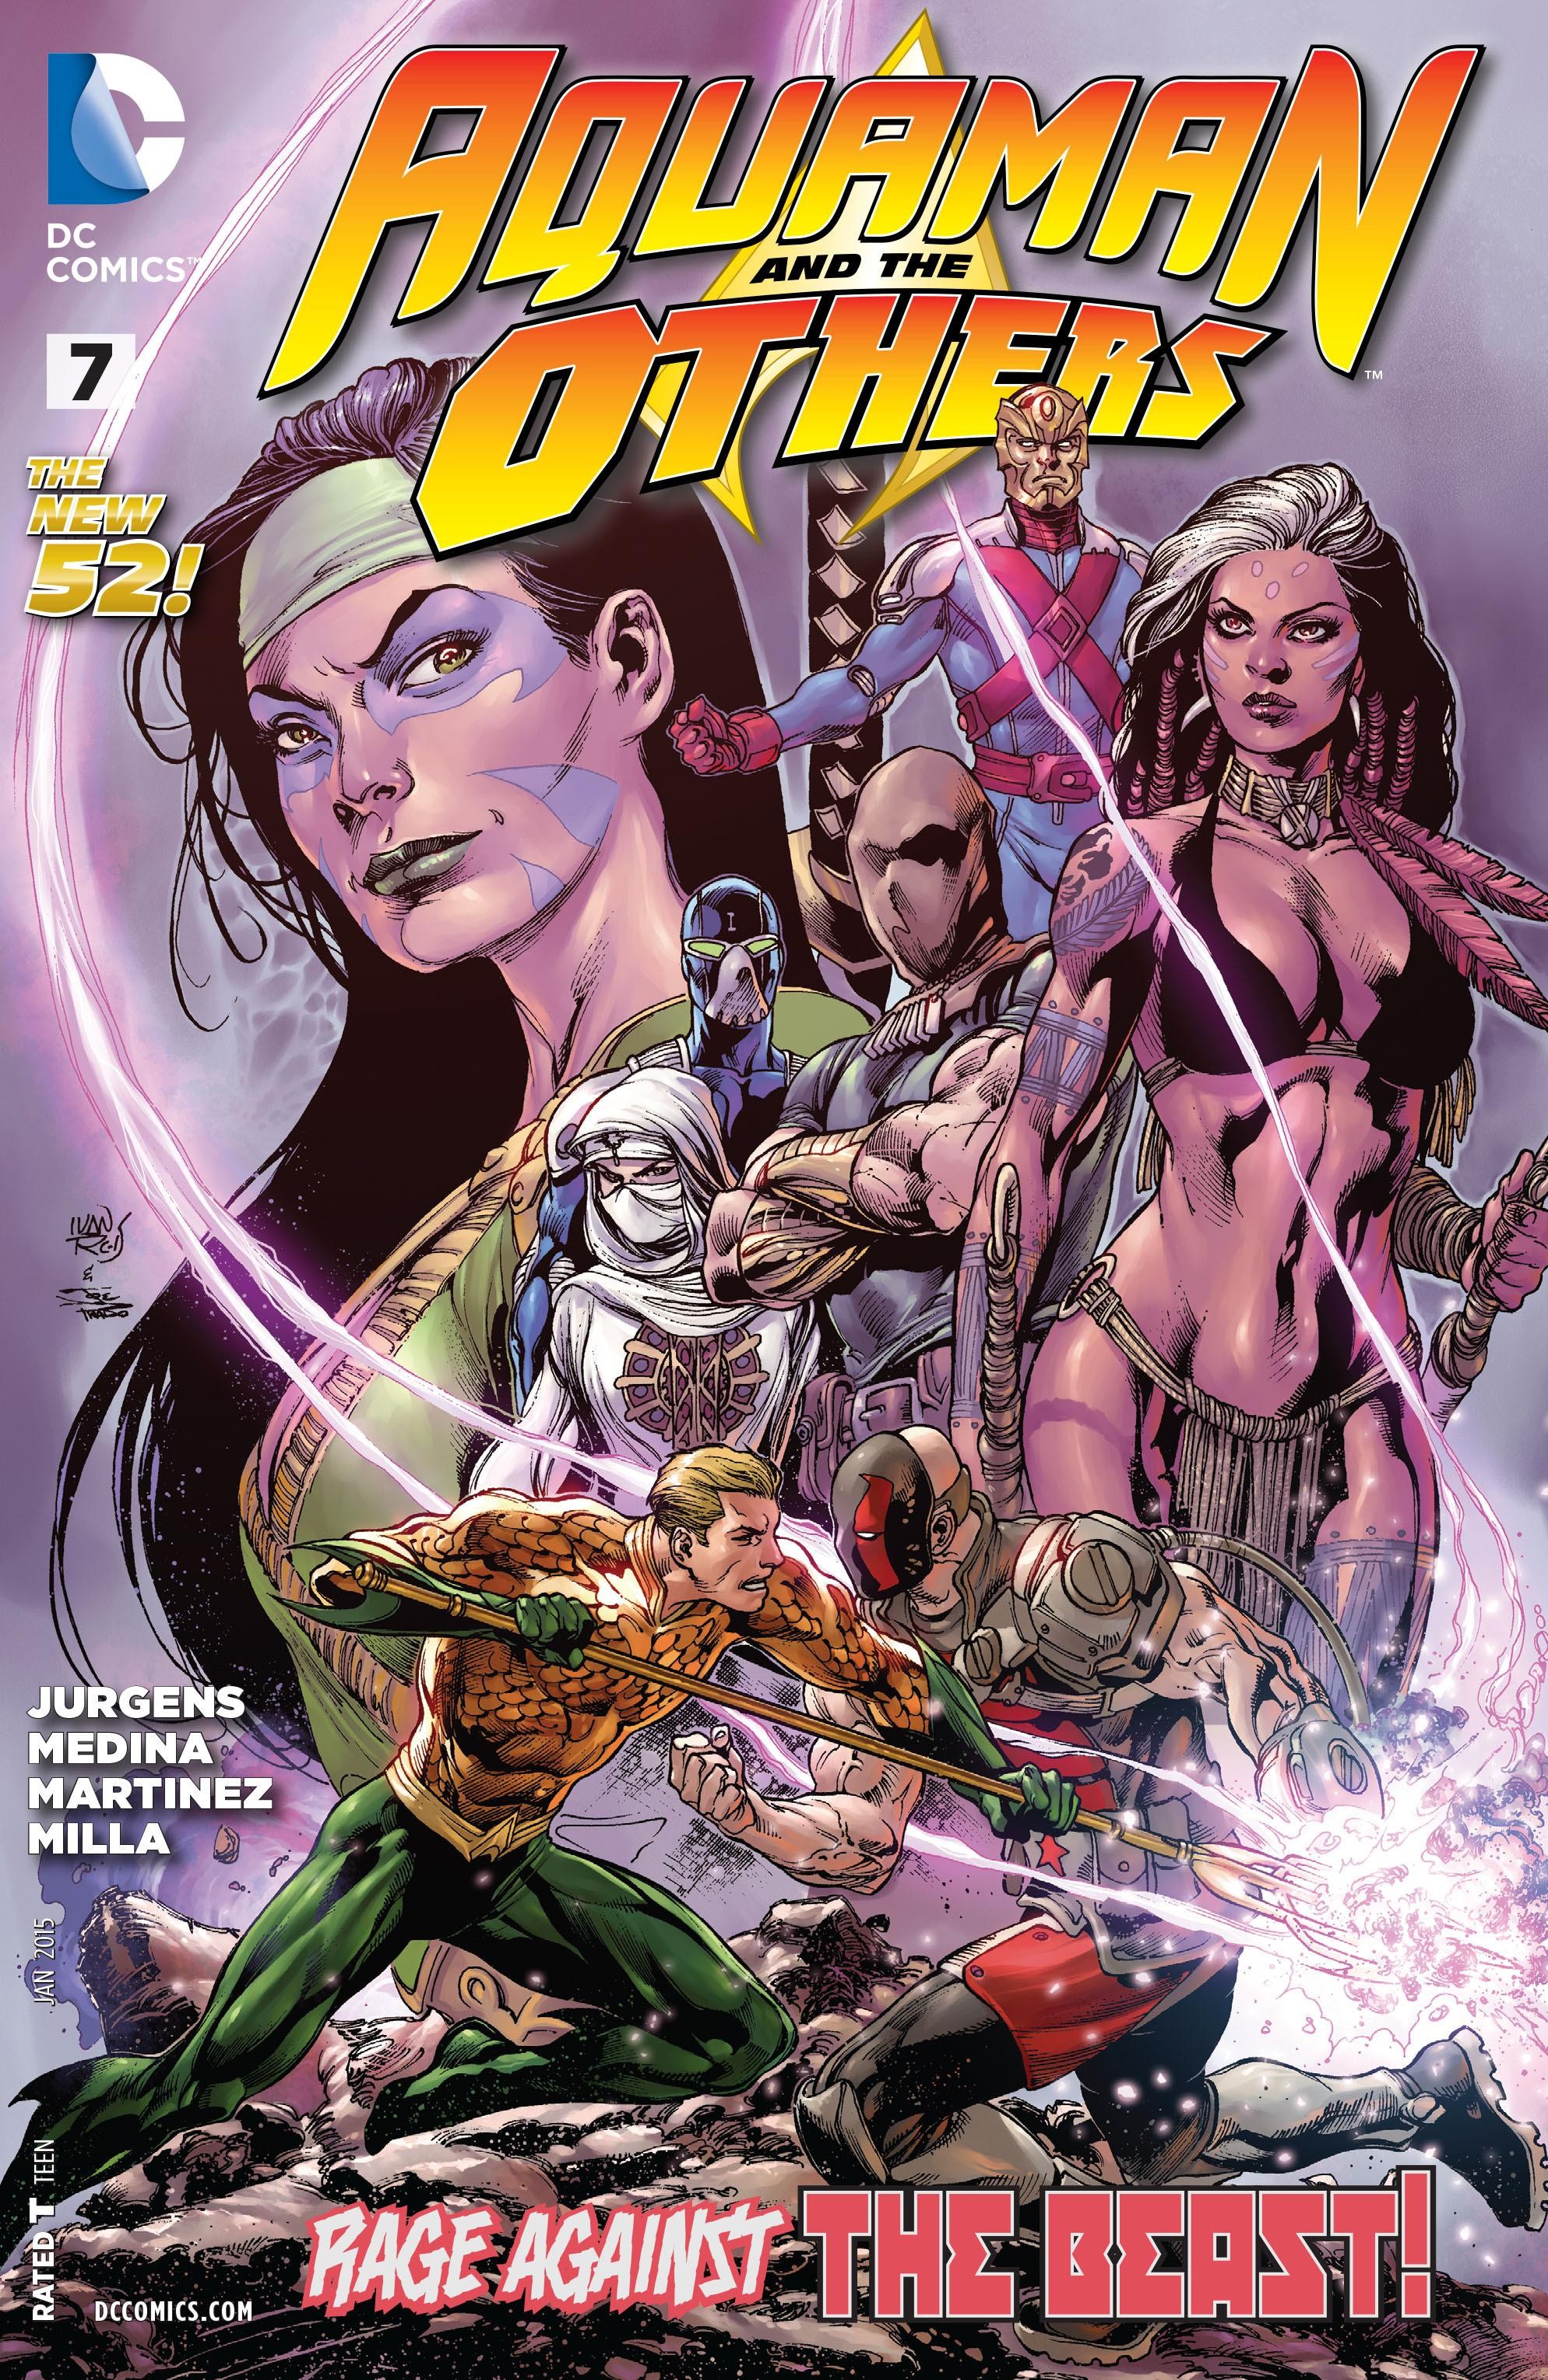 Aquaman and the Others Vol. 1 #7